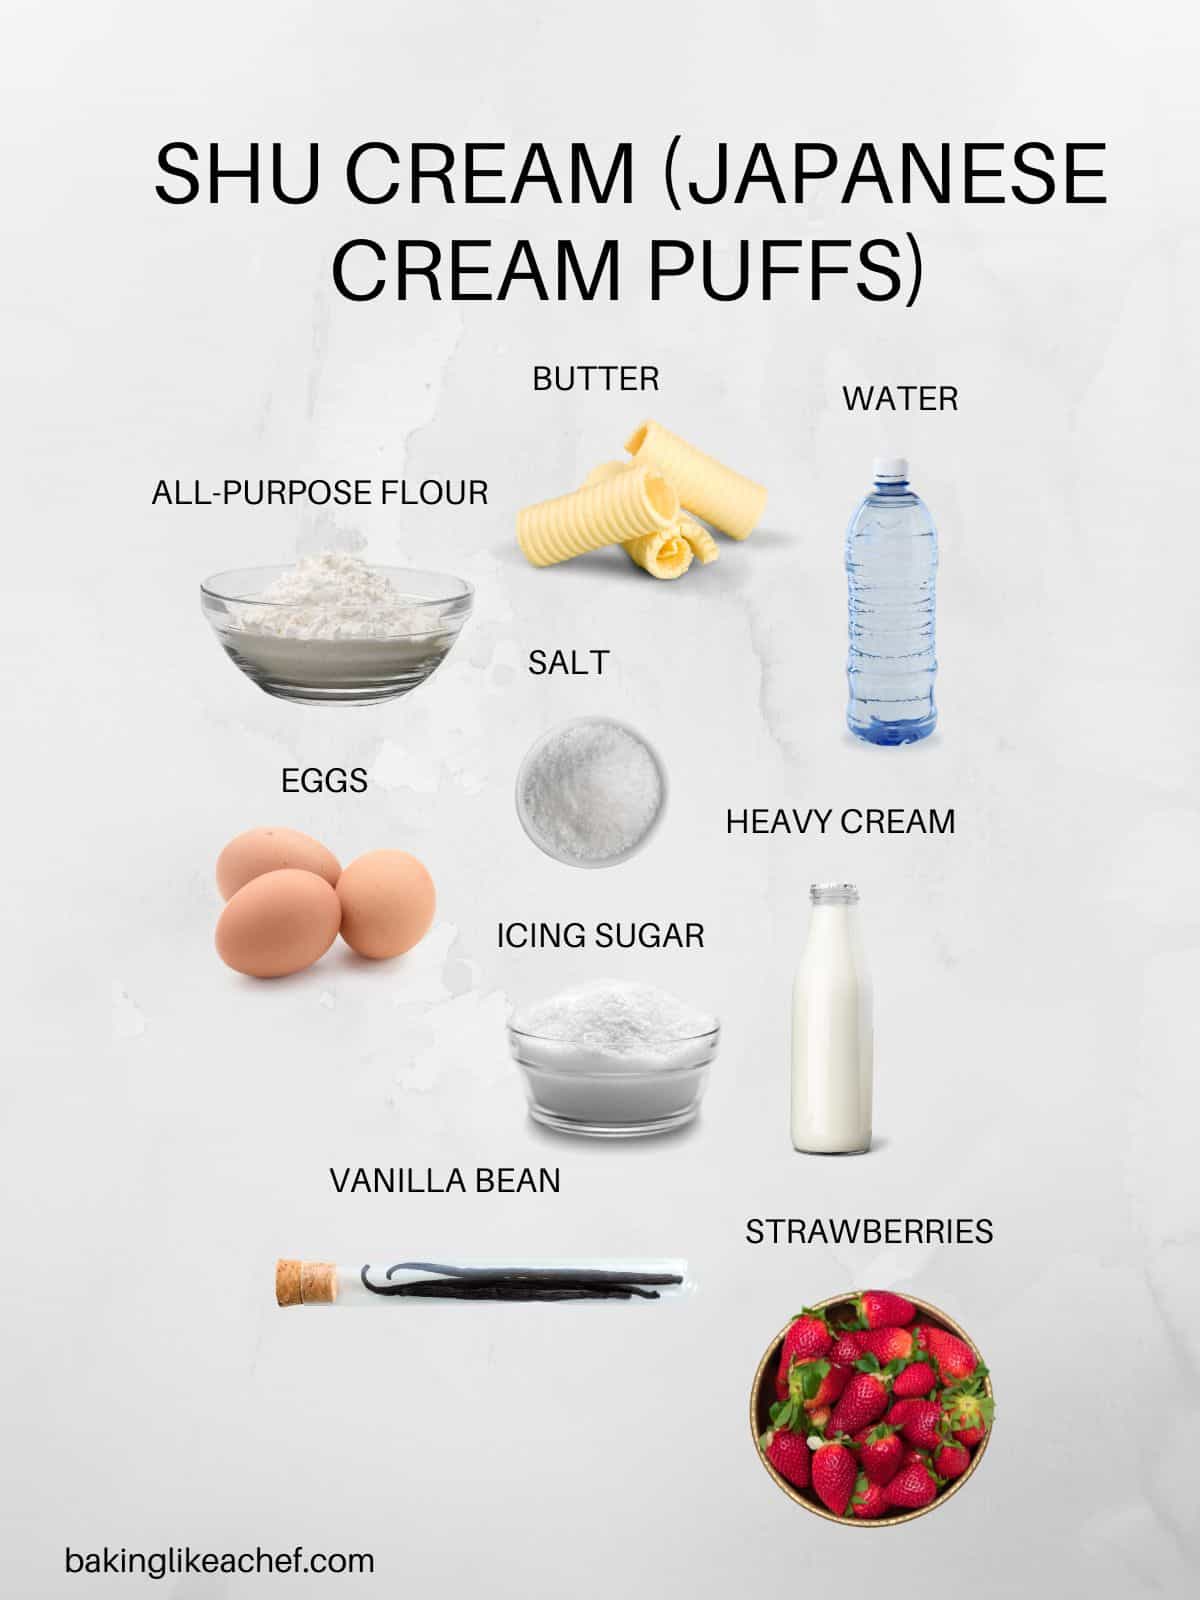 Shu cream puffs ingredients in pictures 